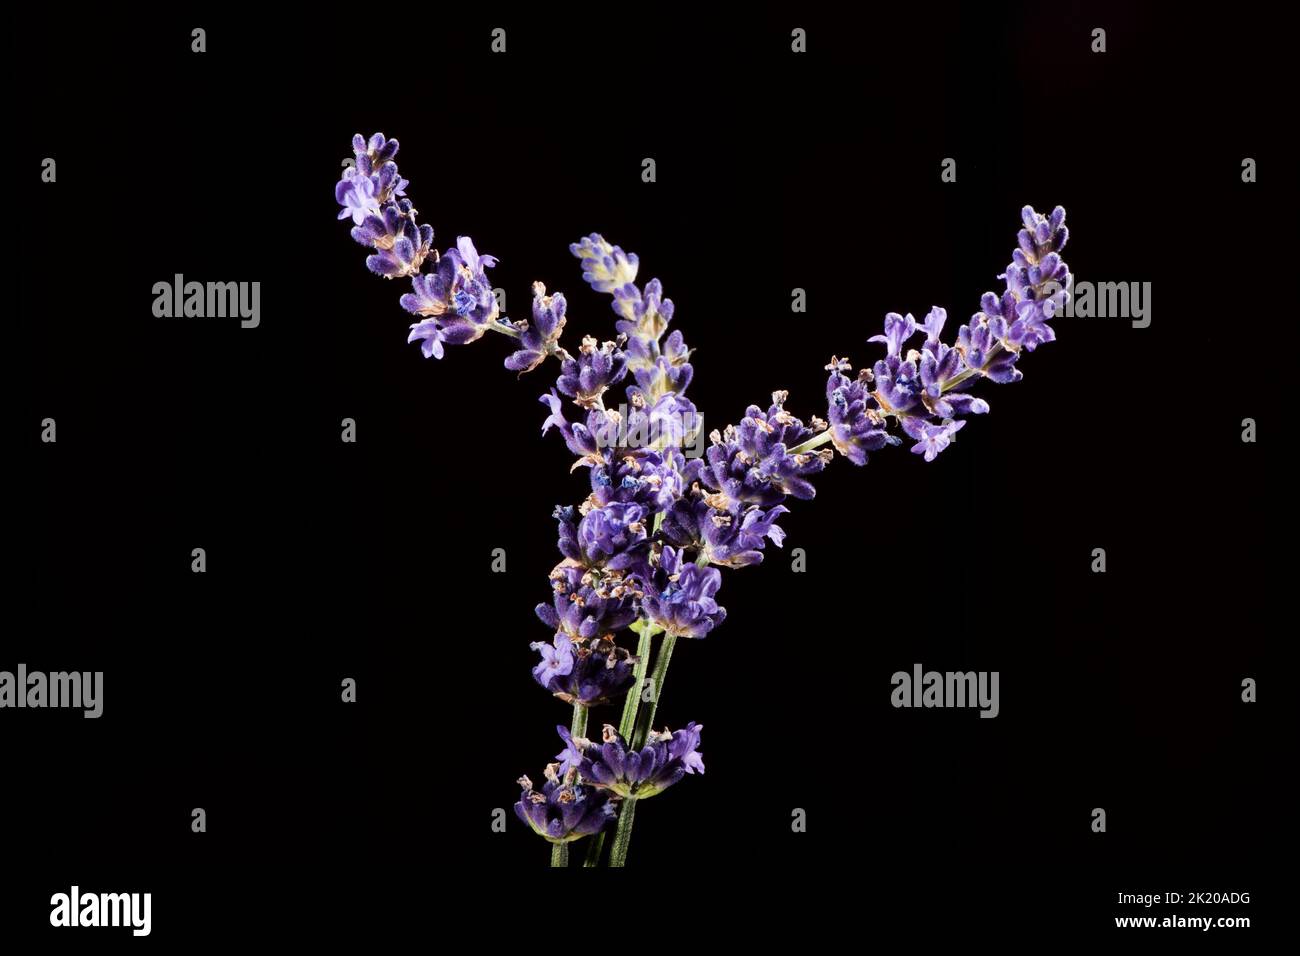 Studio shot of a small bouquet of lavender flowers with three sprigs isolated on black background. Stock Photo